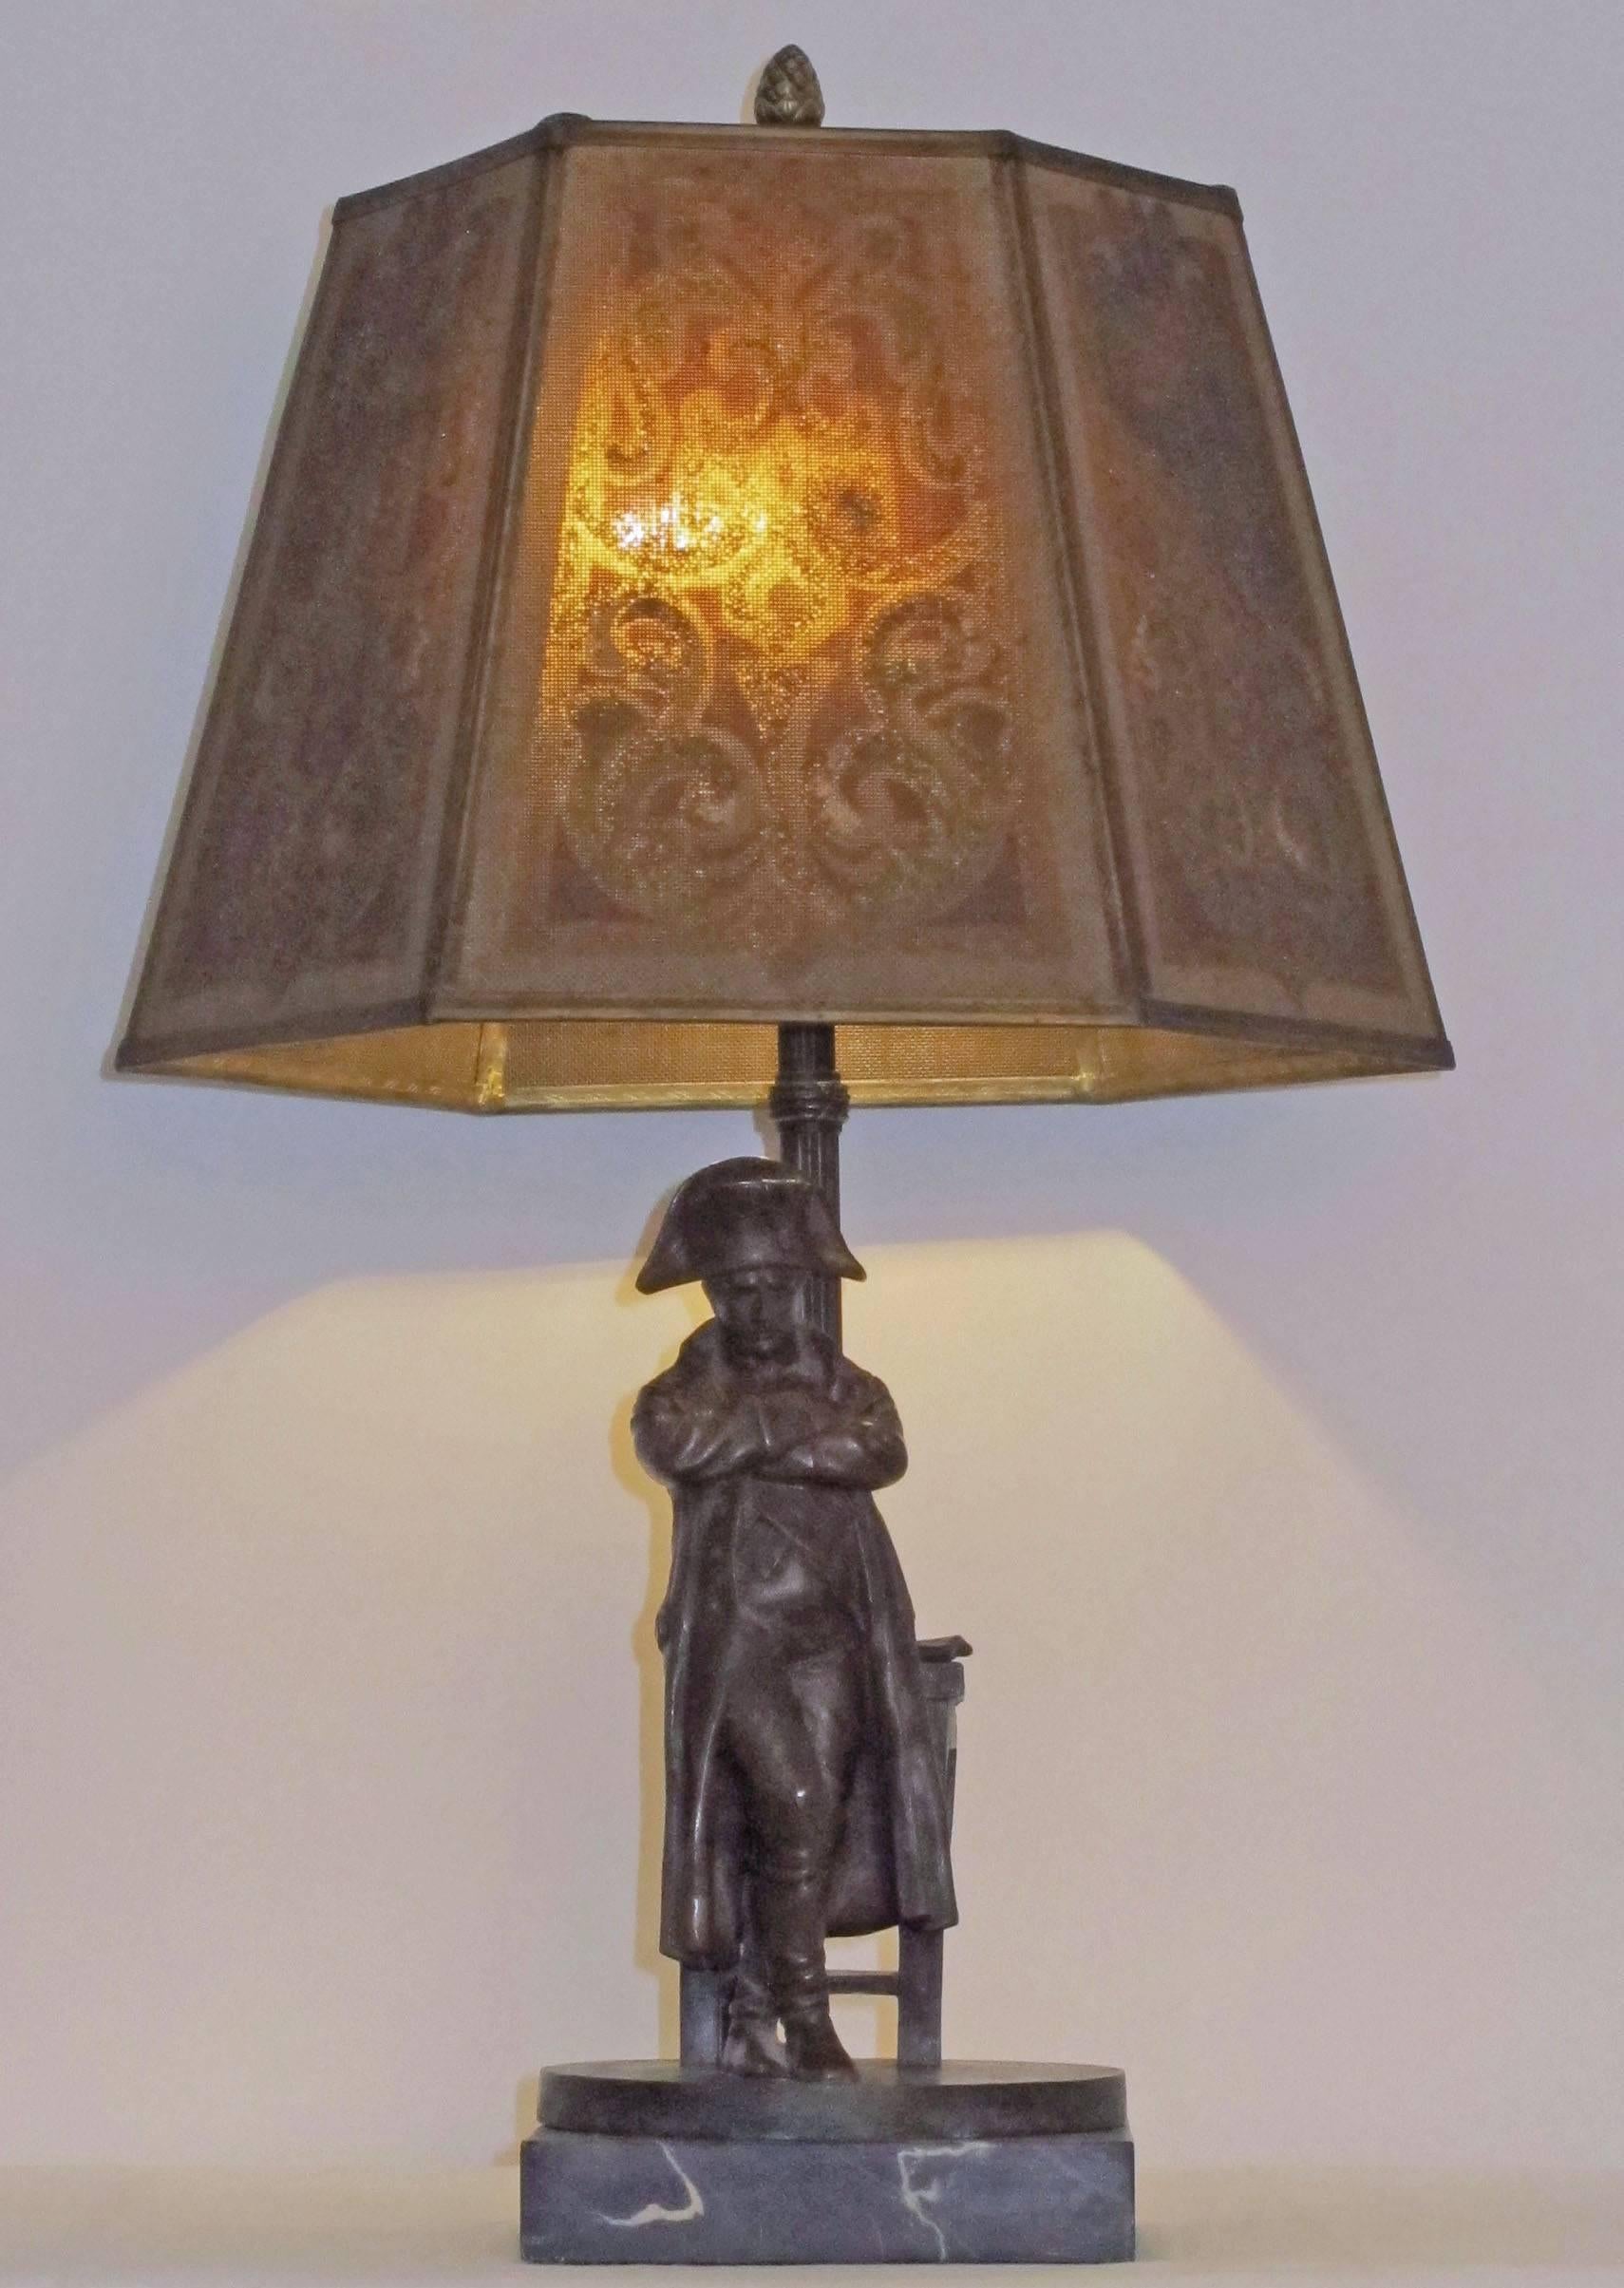 Bronze statue of Napoleon on marble base with a brass mesh and sand shade. Statue is signed Schmidt-Felling (Julius Paul Schmidt-Felling (1835–1920) was a German sculptor who worked during the mid-19th century and early 20th century.
Lamp has been